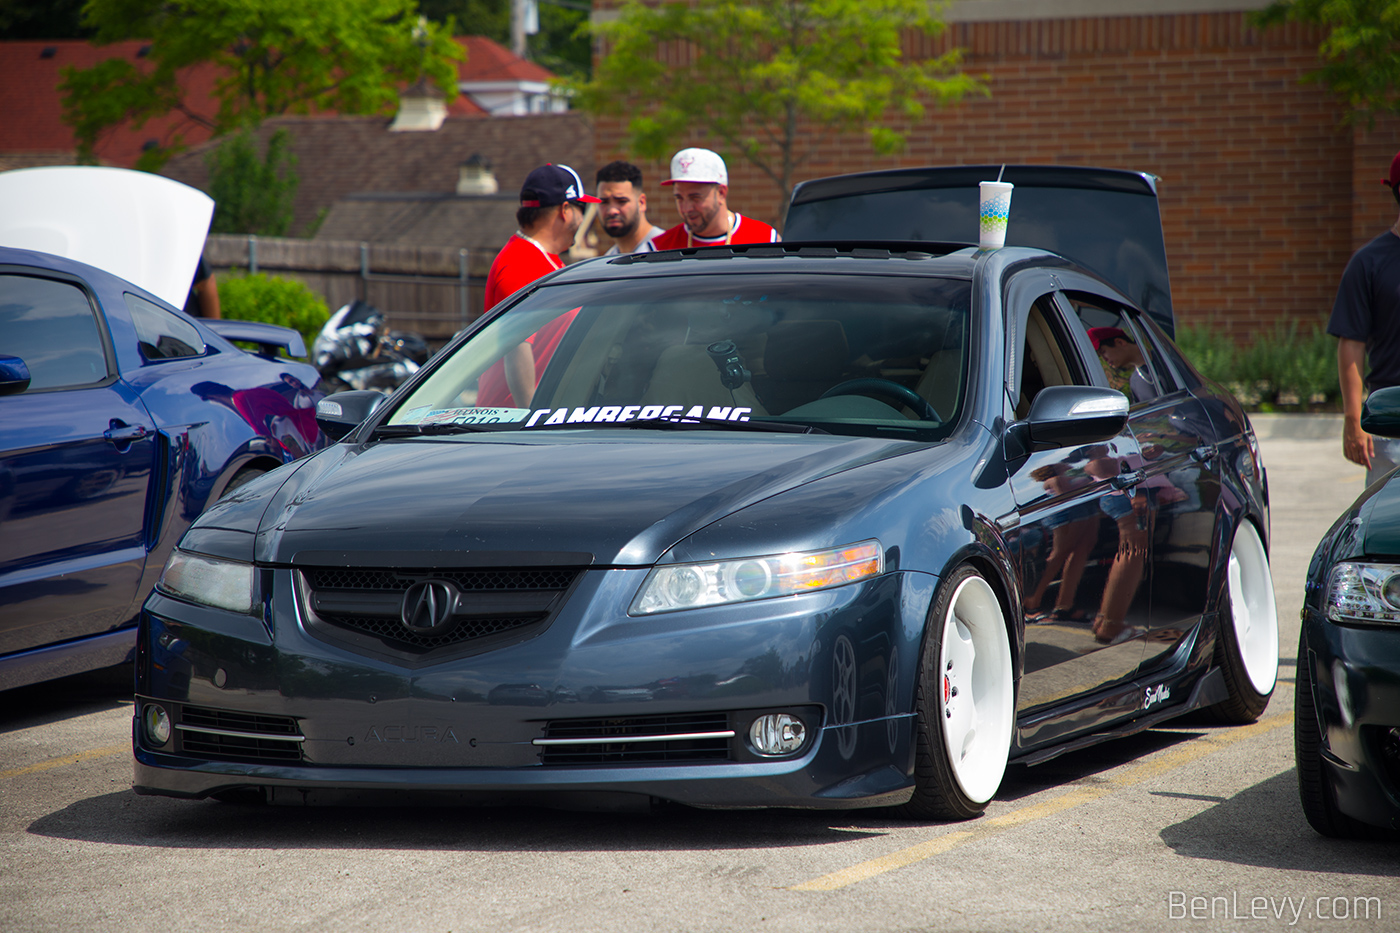 Bagged Acura TL on White Wheels